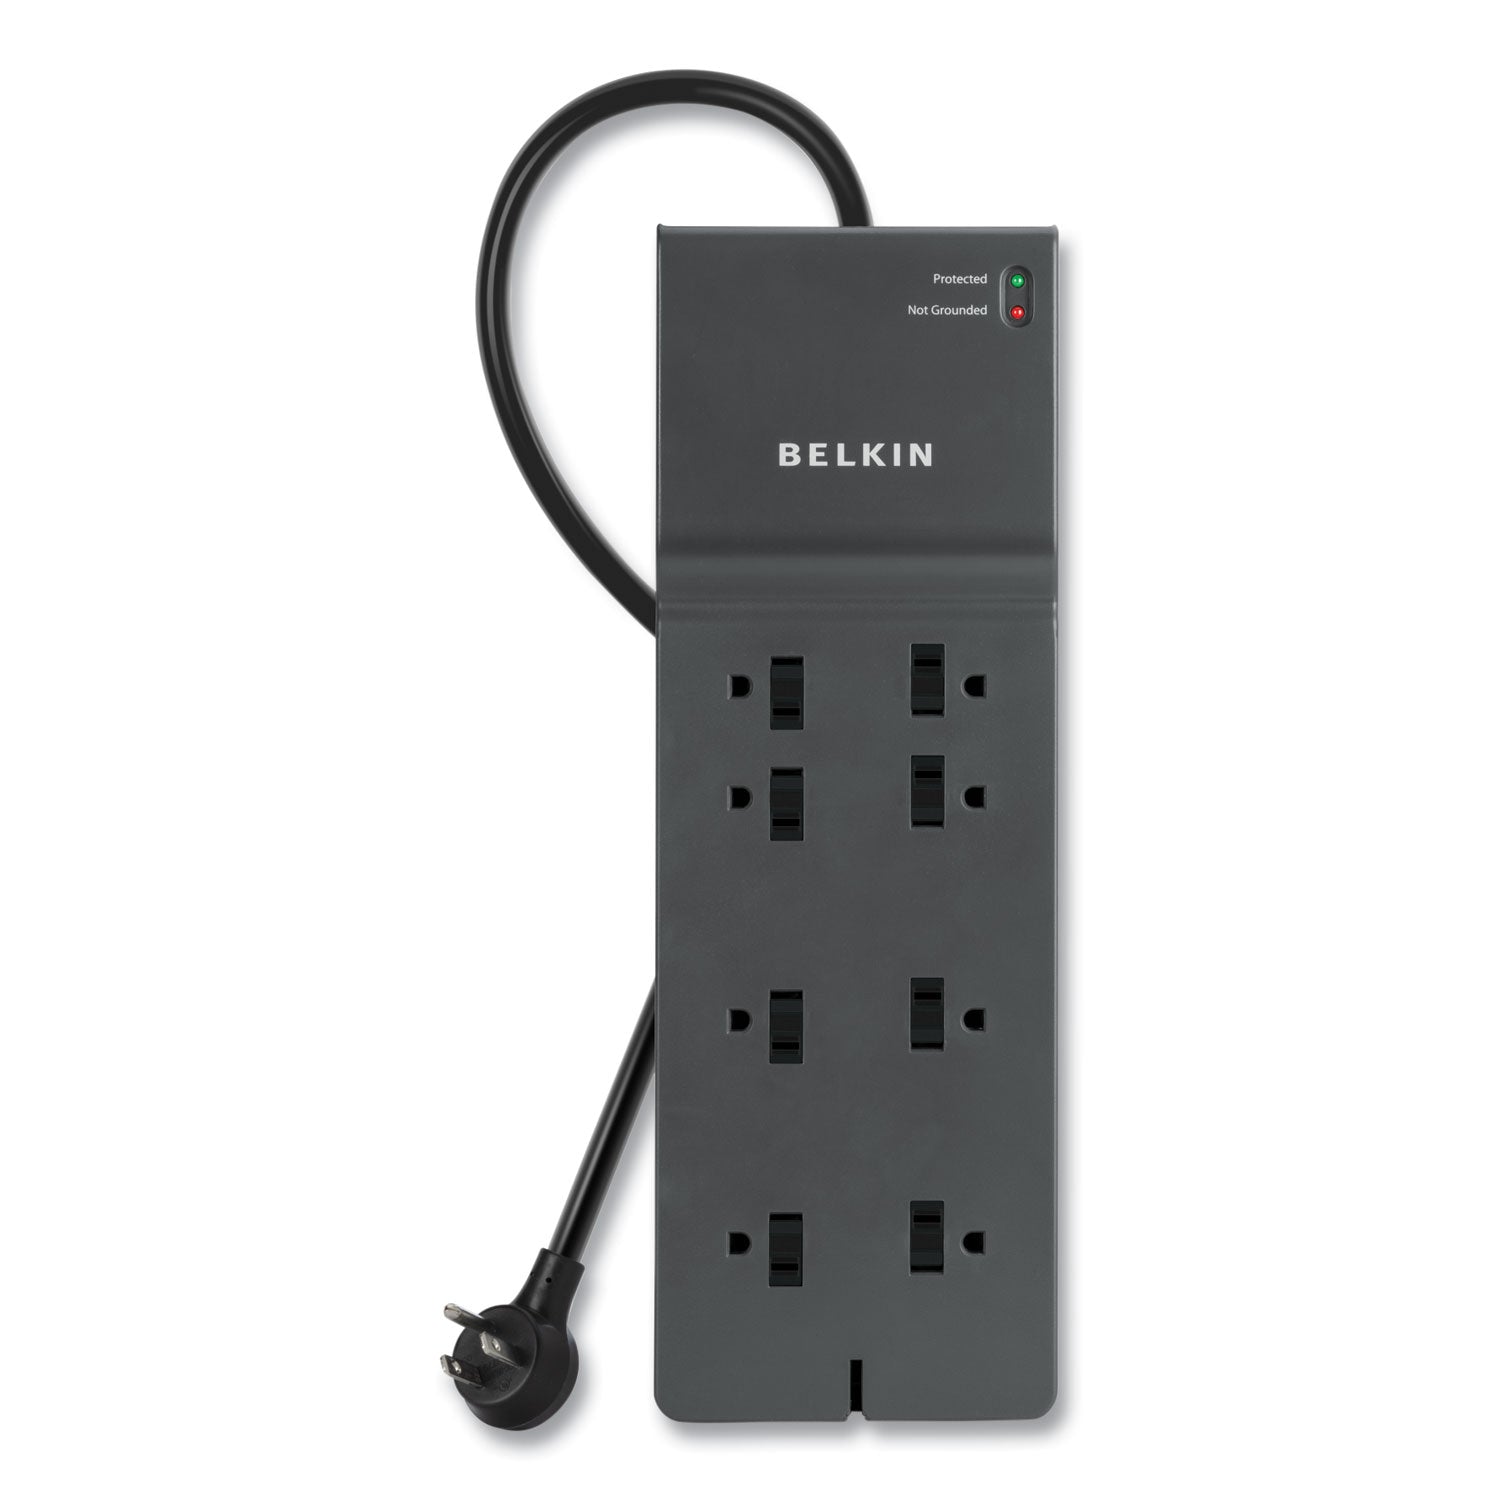 home-office-surge-protector-8-ac-outlets-8-ft-cord-2500-j-black_blkbe10800008cm - 1